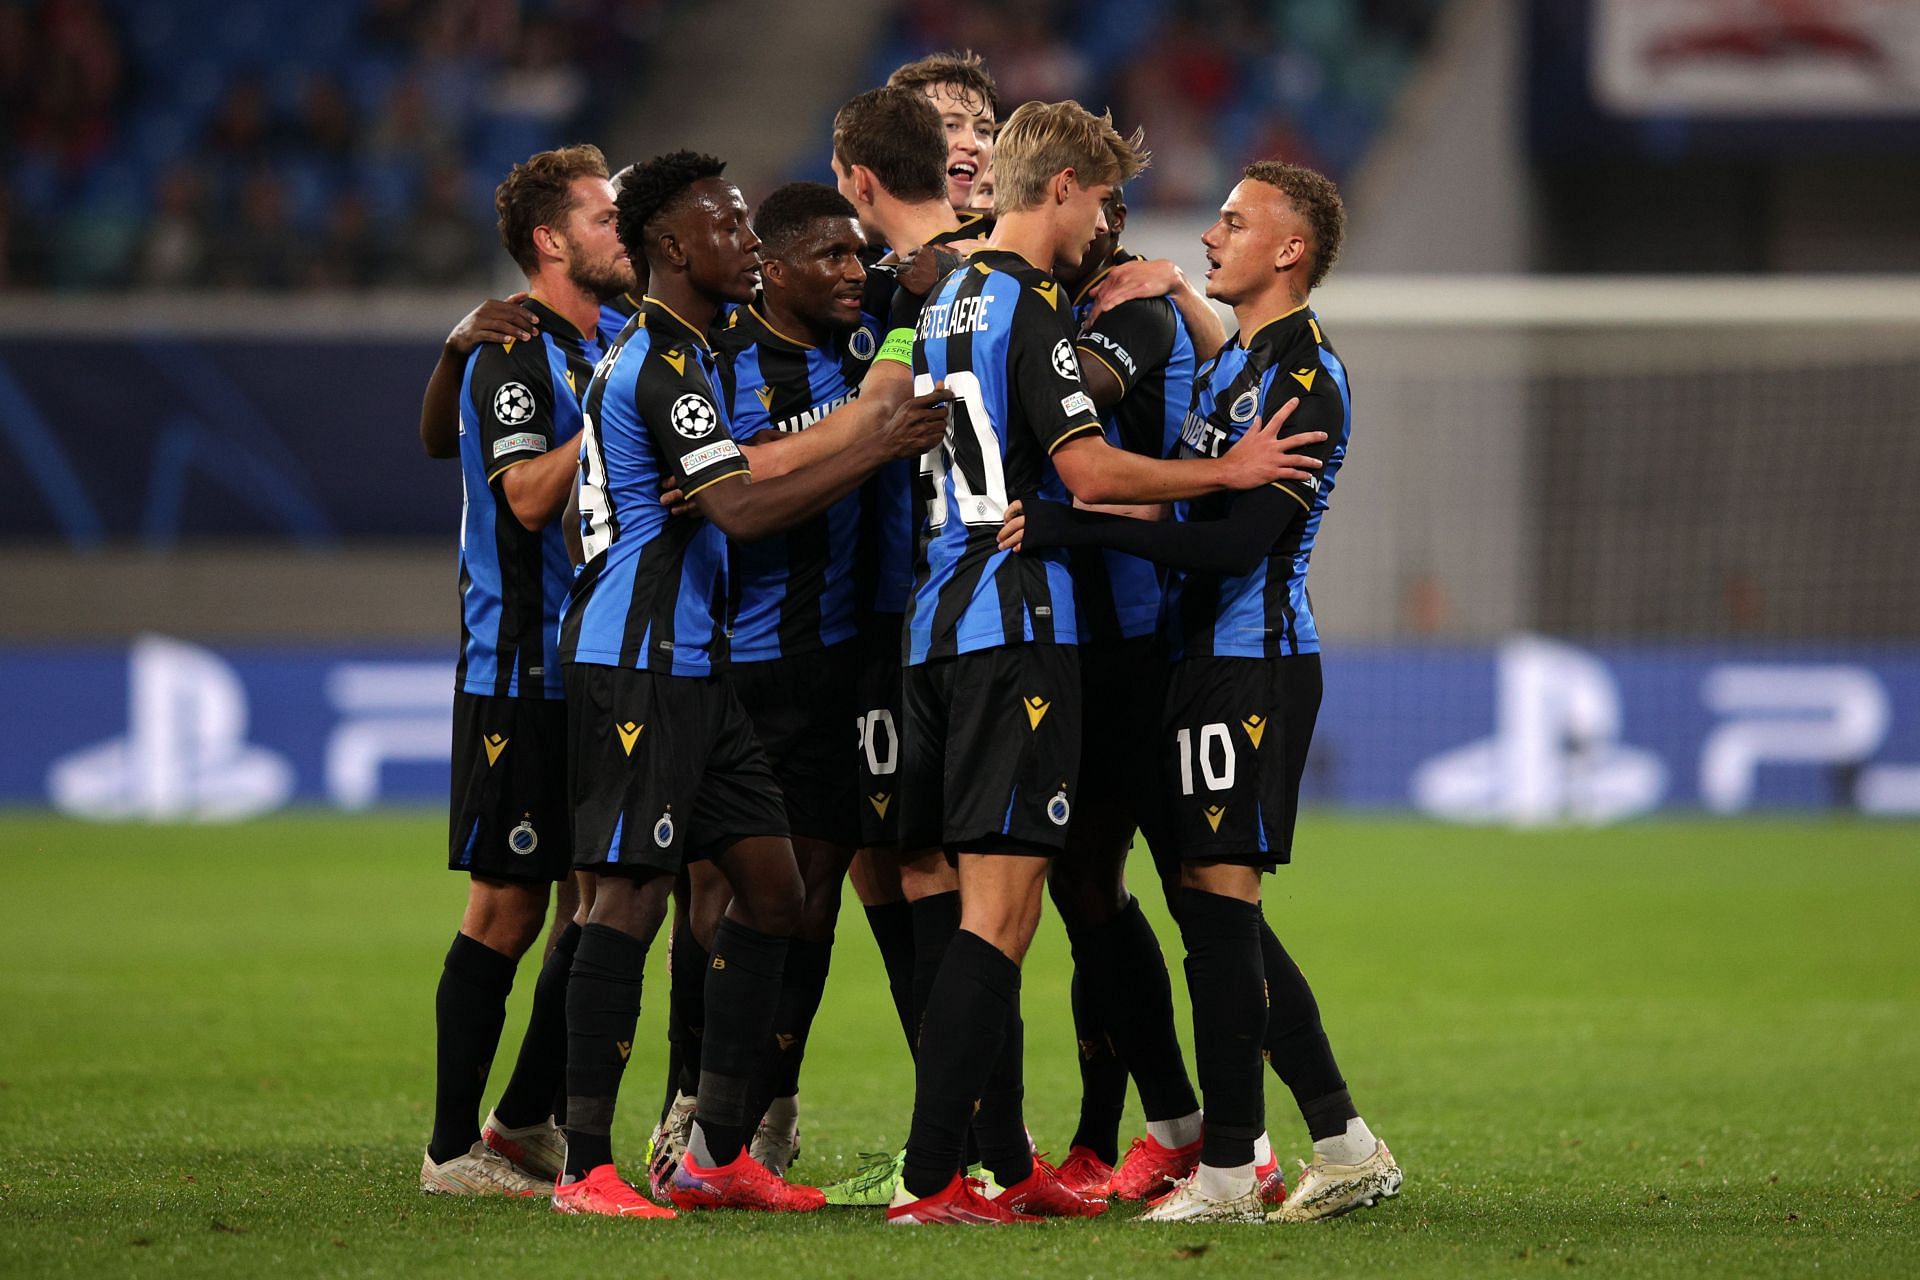 Club Brugge will face Anderlecht on Sunday.